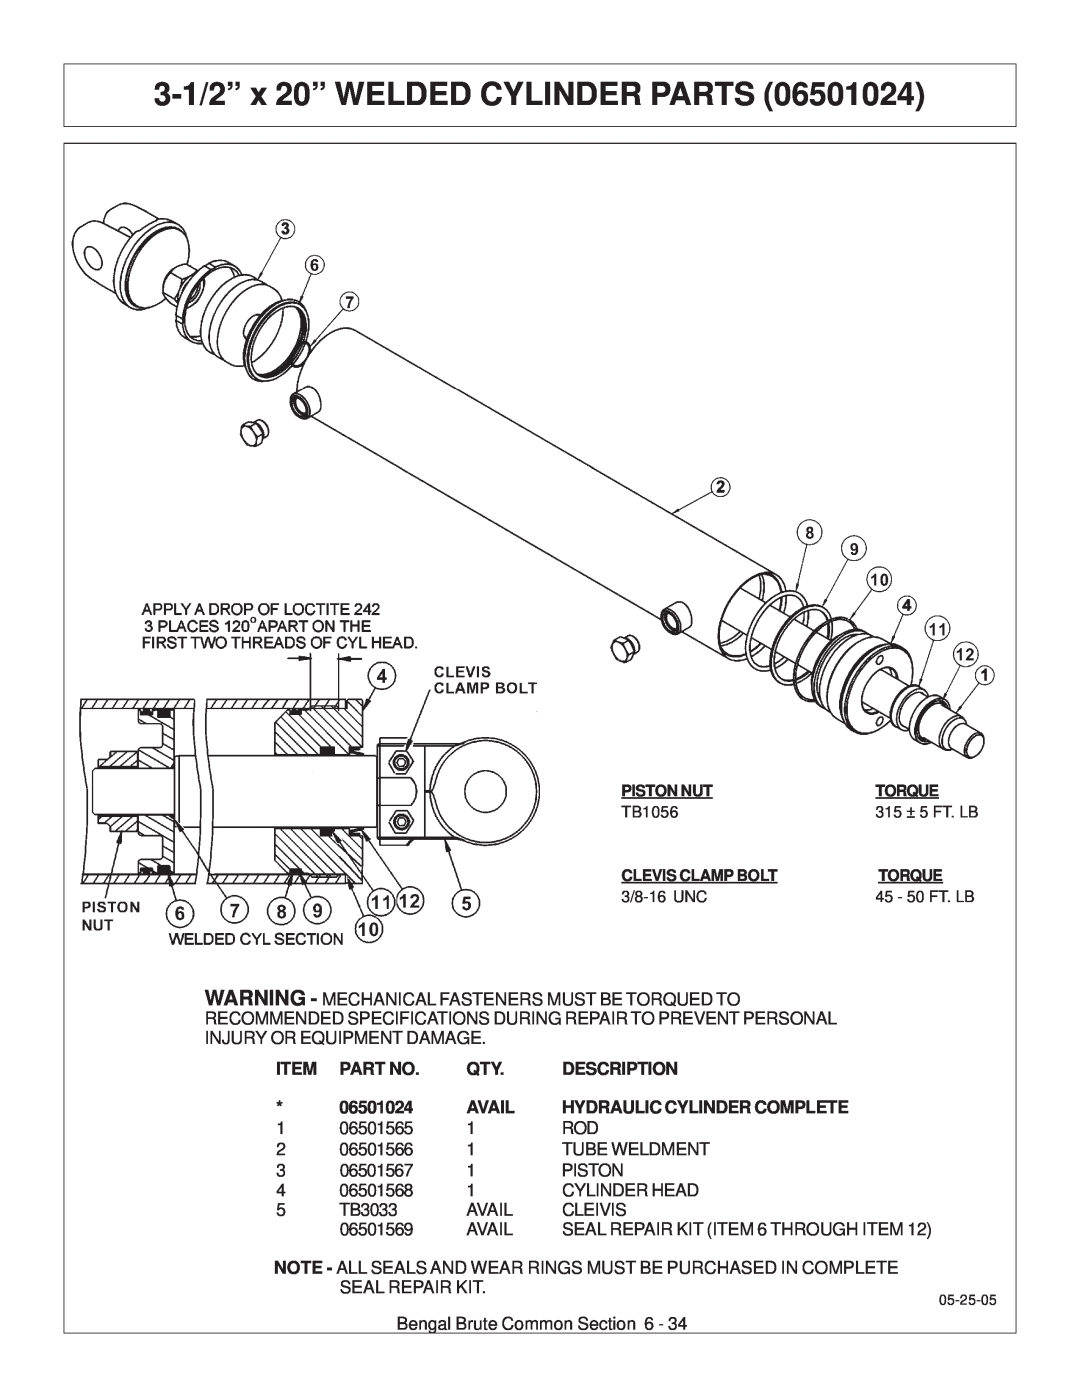 Tiger JD 62-6420 manual 3-1/2” x 20” WELDED CYLINDER PARTS, Description, 06501024, Avail, Hydraulic Cylinder Complete 